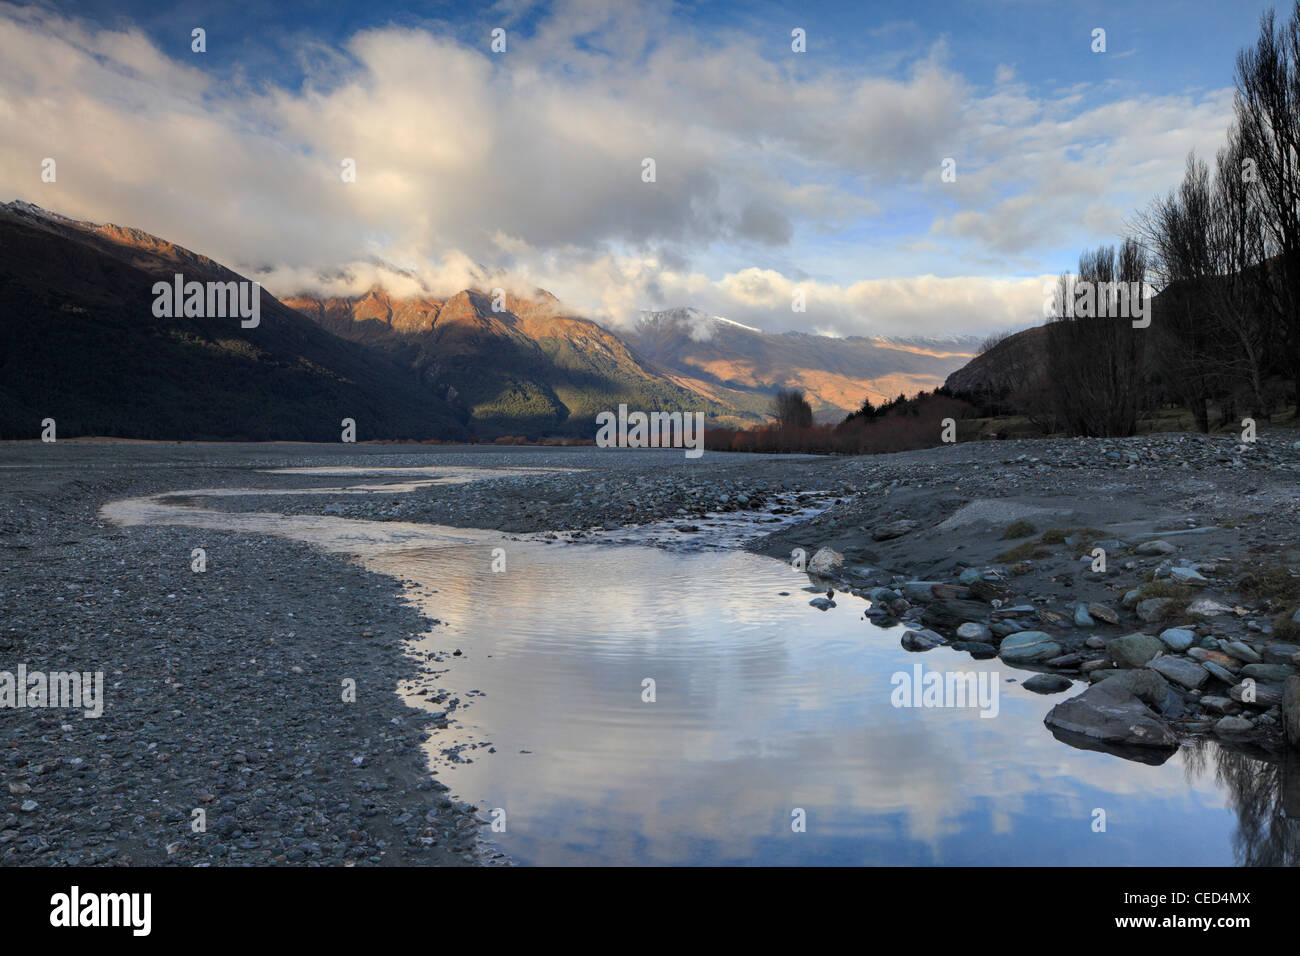 Snow-covered mountains reflected in an eddy of the Matukituki River in Mt Aspiring National Park Stock Photo